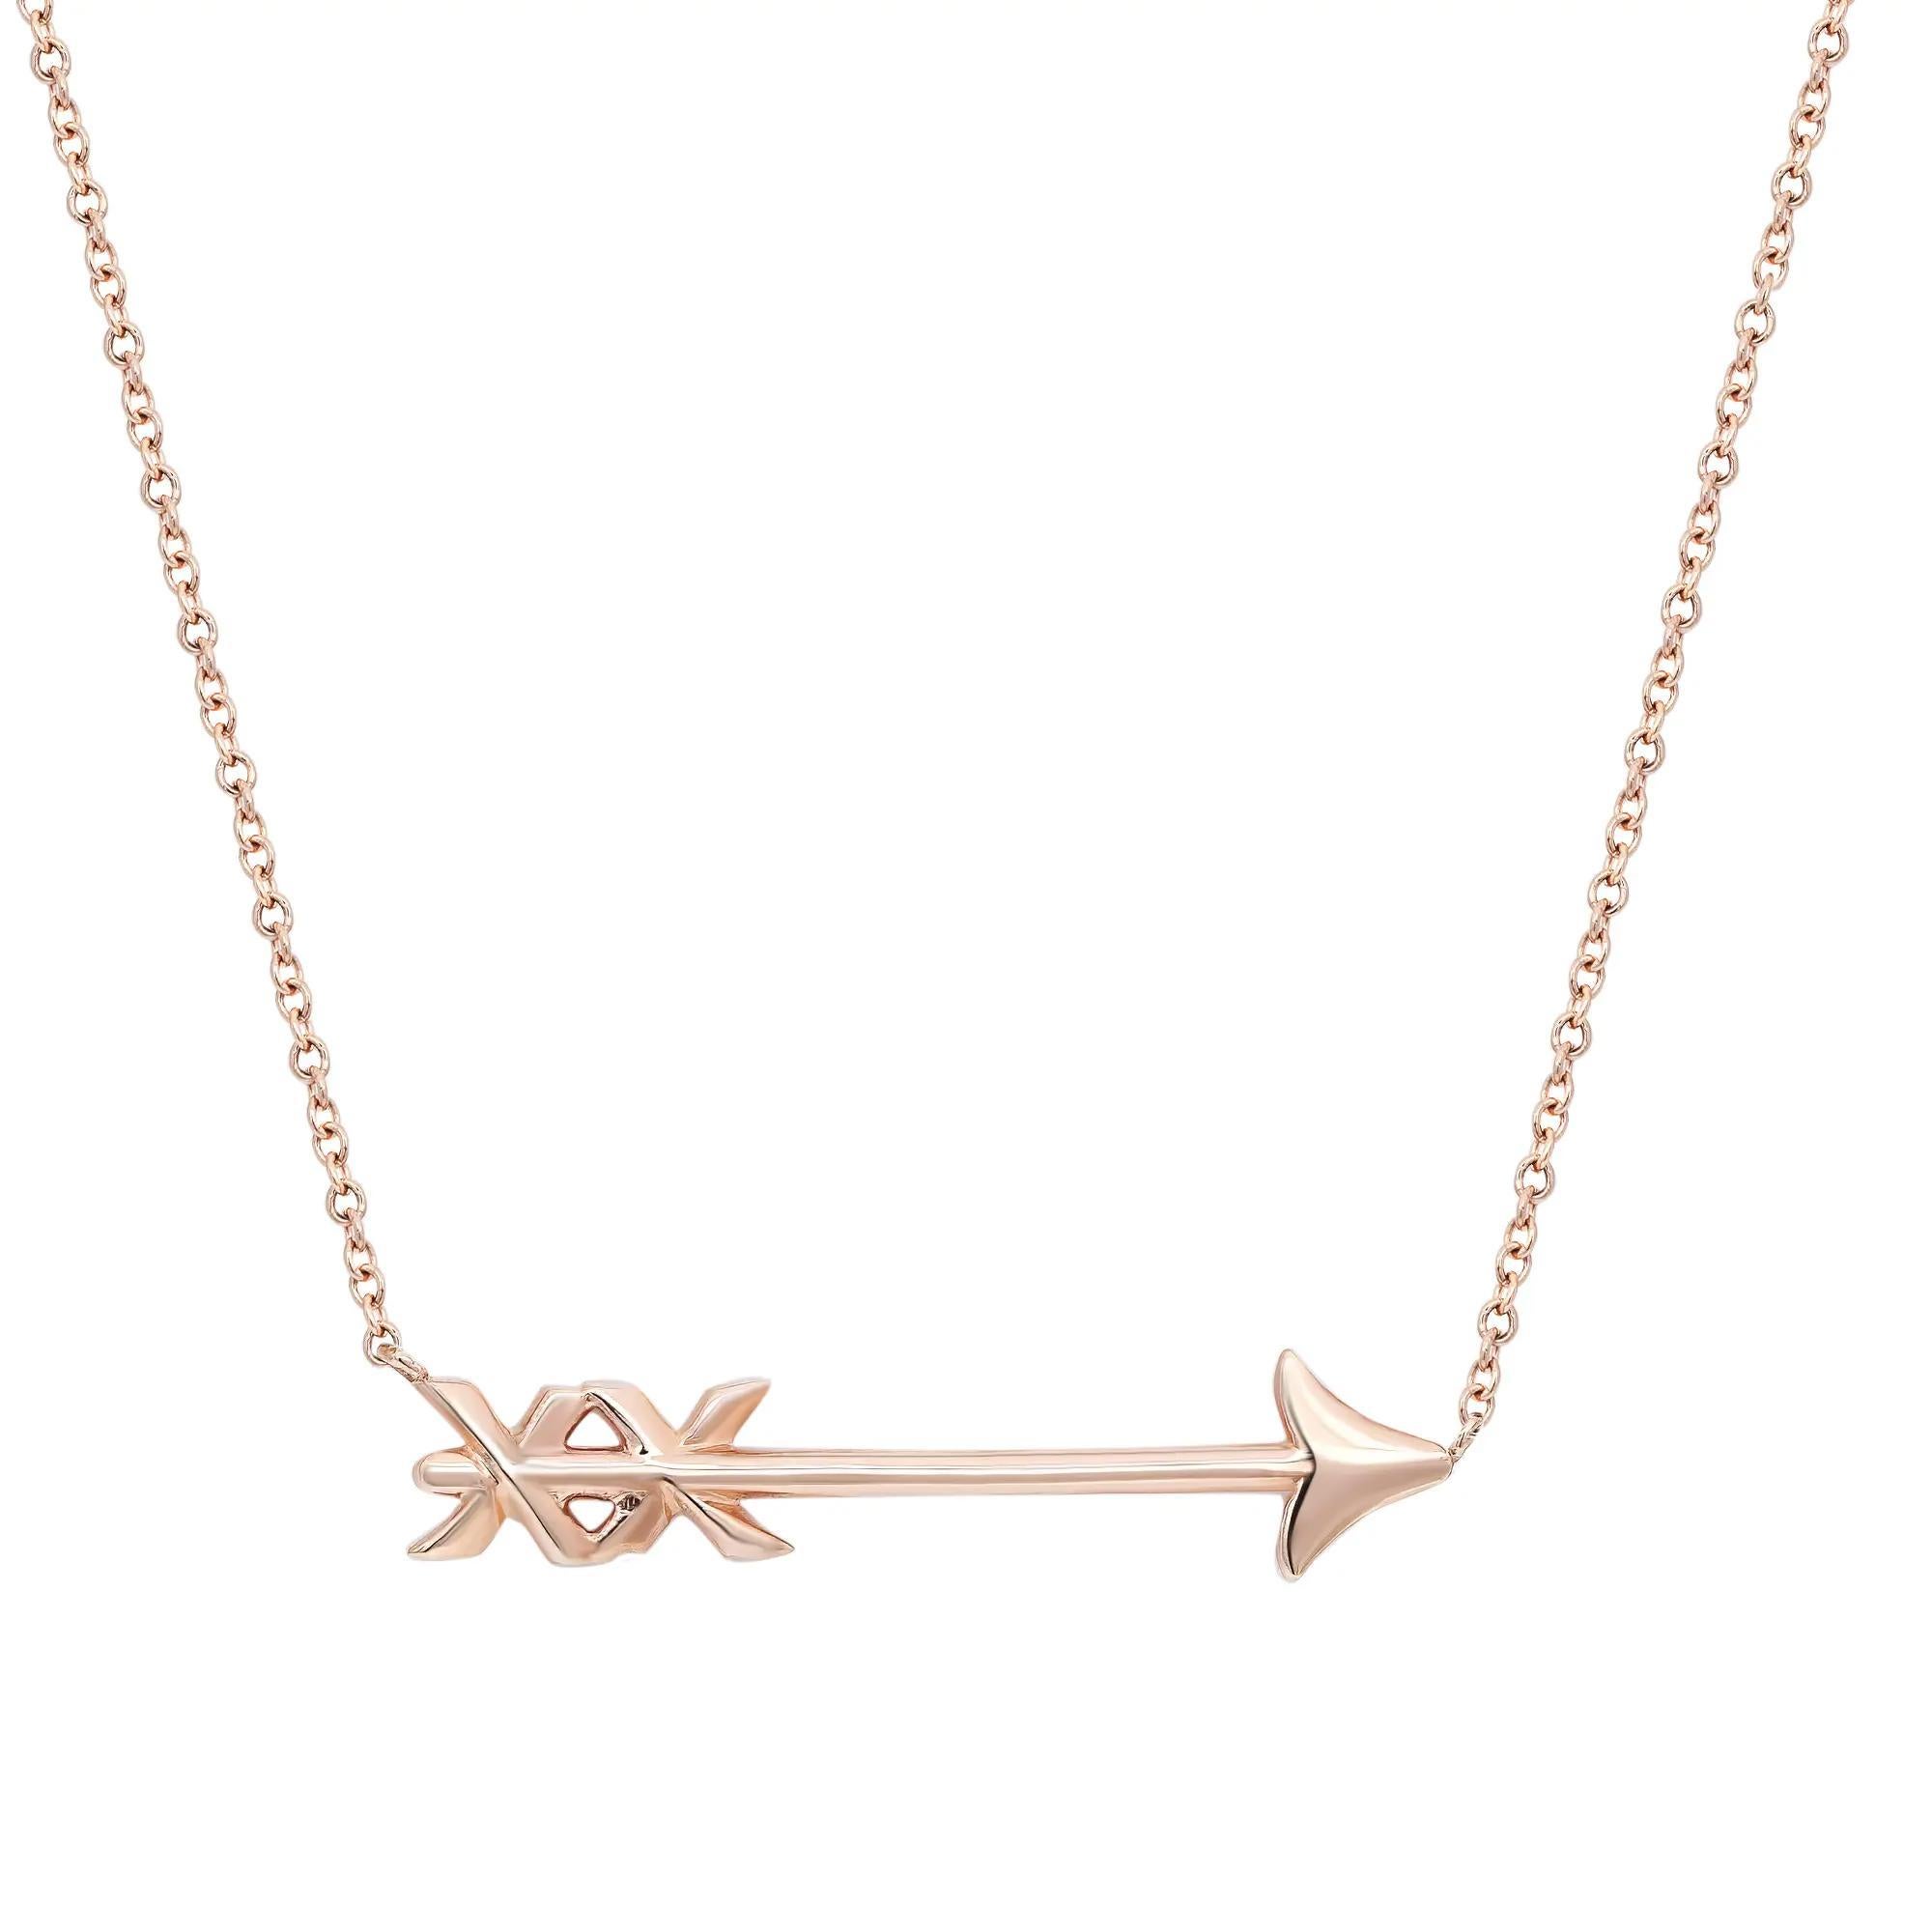 Modern Tiffany Paloma’s Graffiti Arrow Pendant Necklace 18K Rose Gold 18 Inches For Sale